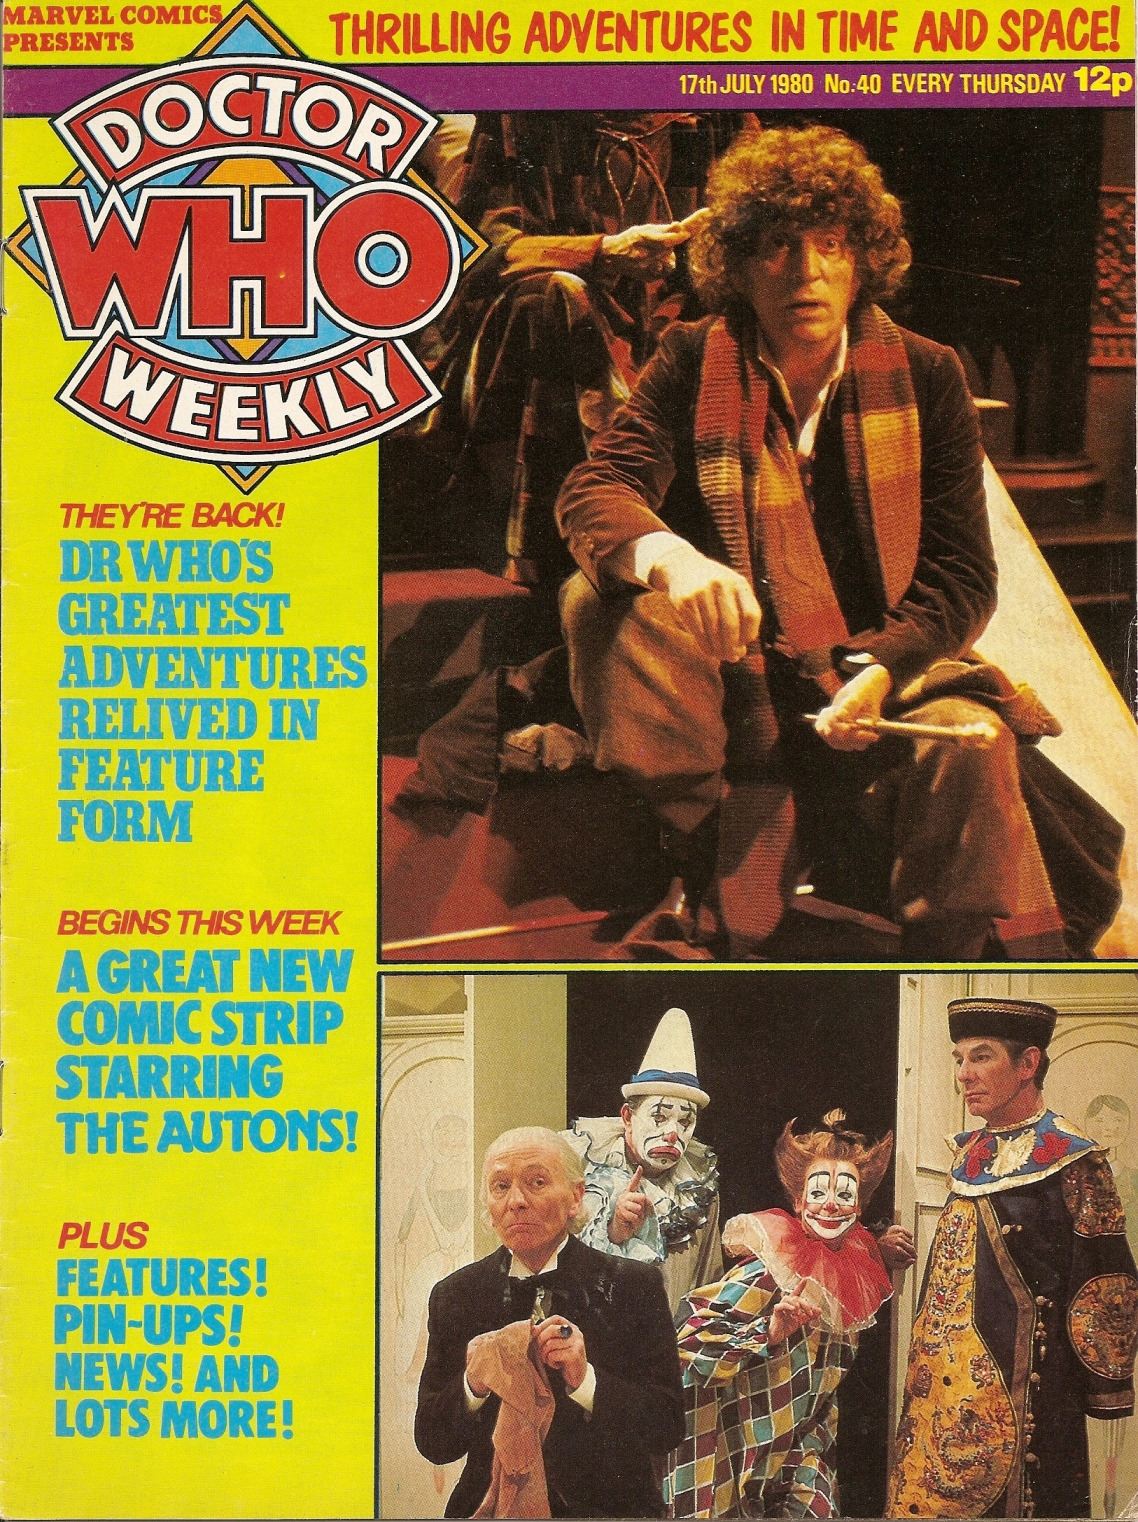 Doctor Who Weekly - Issue 40 - 17th July 1980